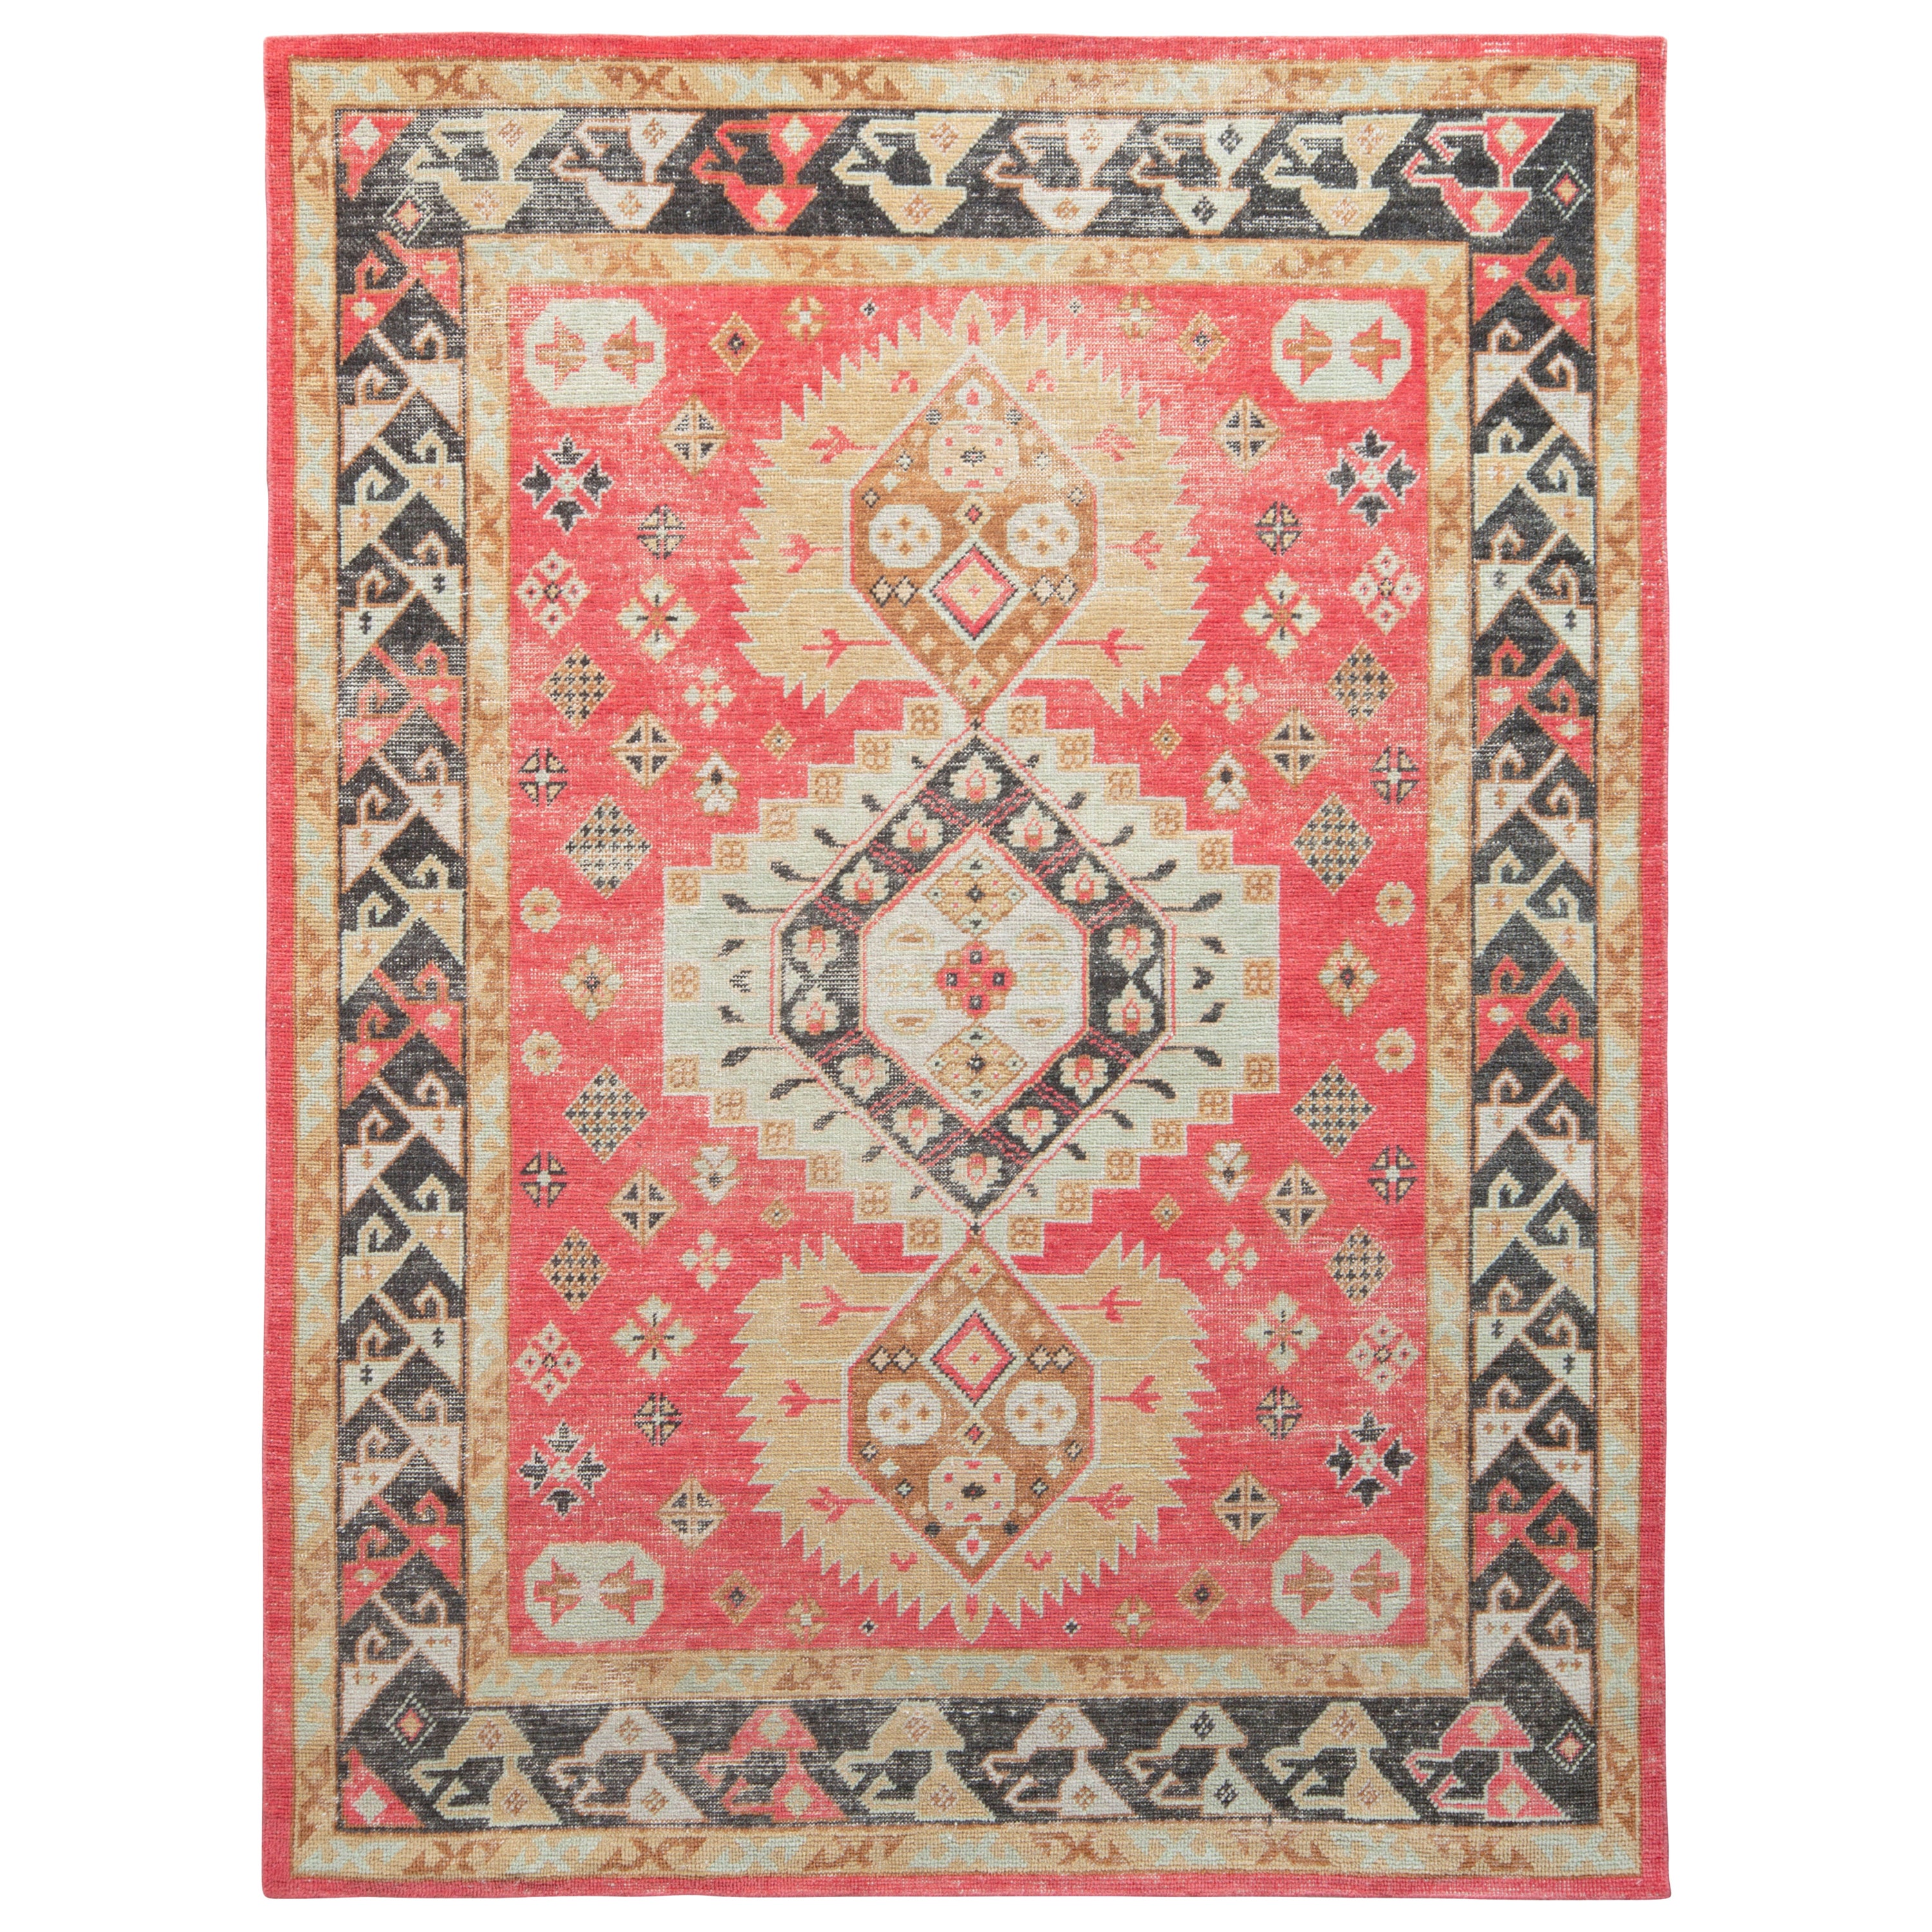 Rug & Kilim's Distressed Classic Style Teppich in Rot, Beige-Braun Medaillon-Muster